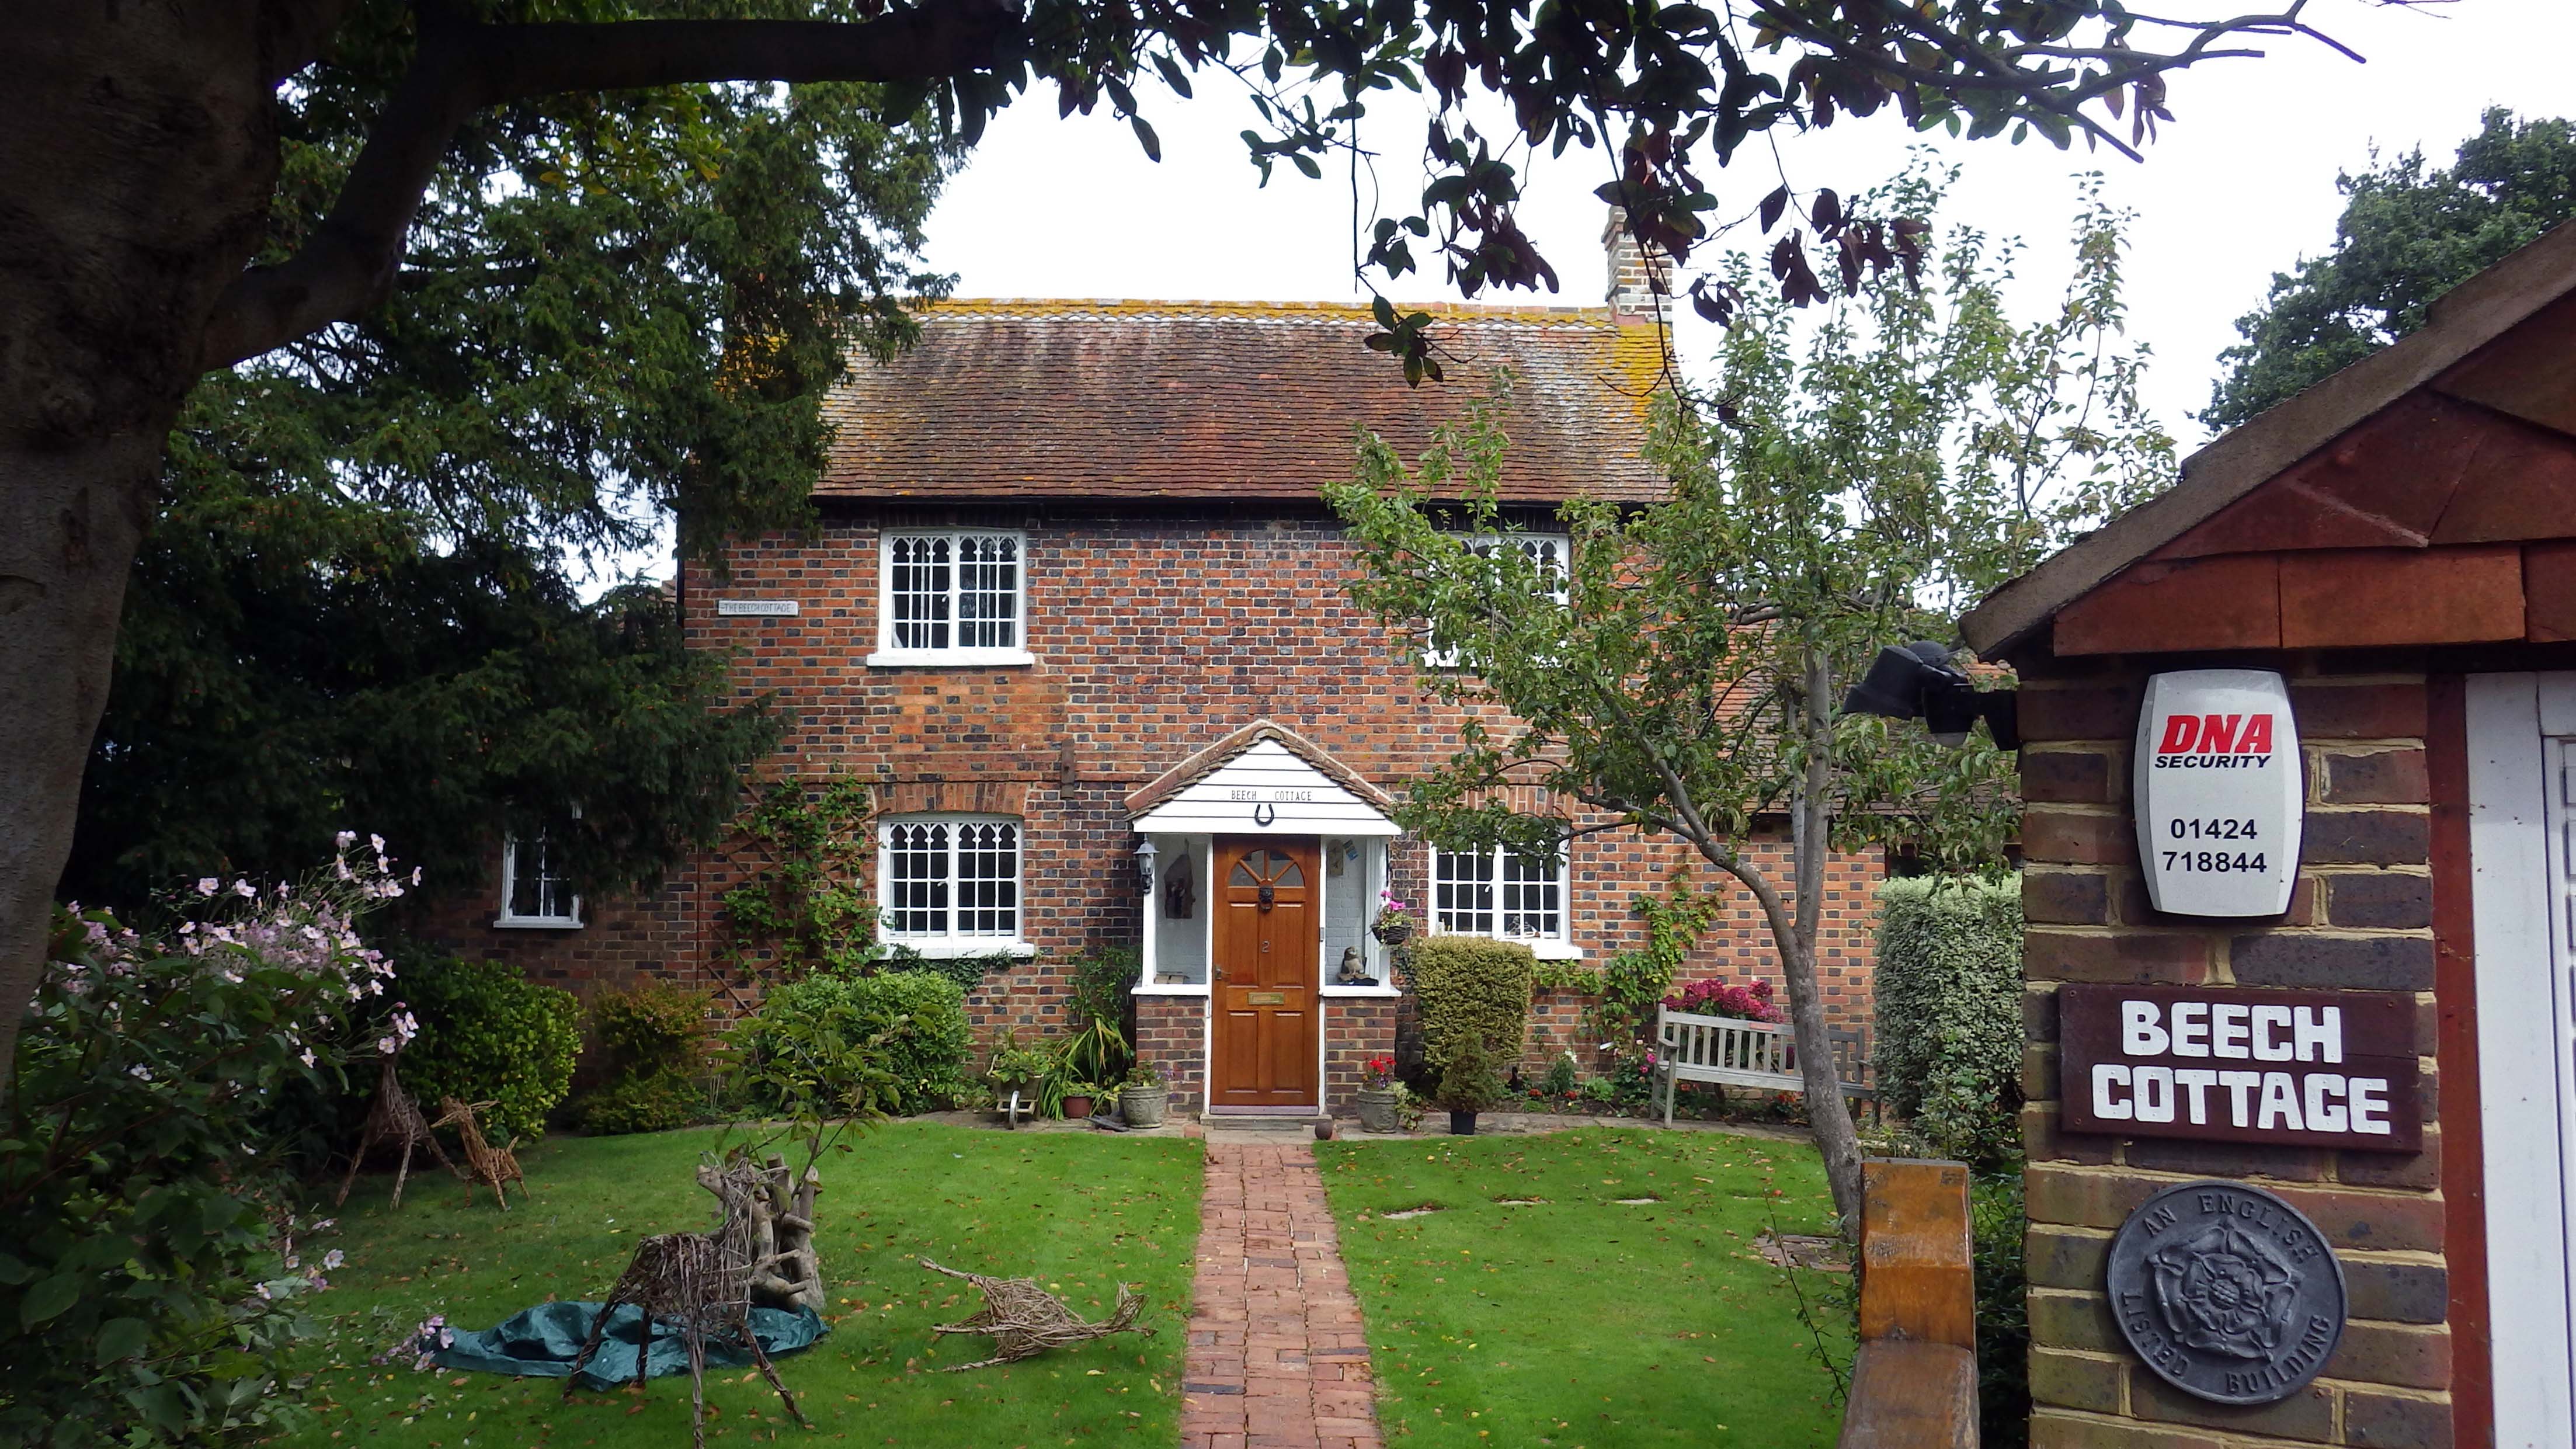 Beech Cottage, 2 Green Lane, Little Common, Bexhill